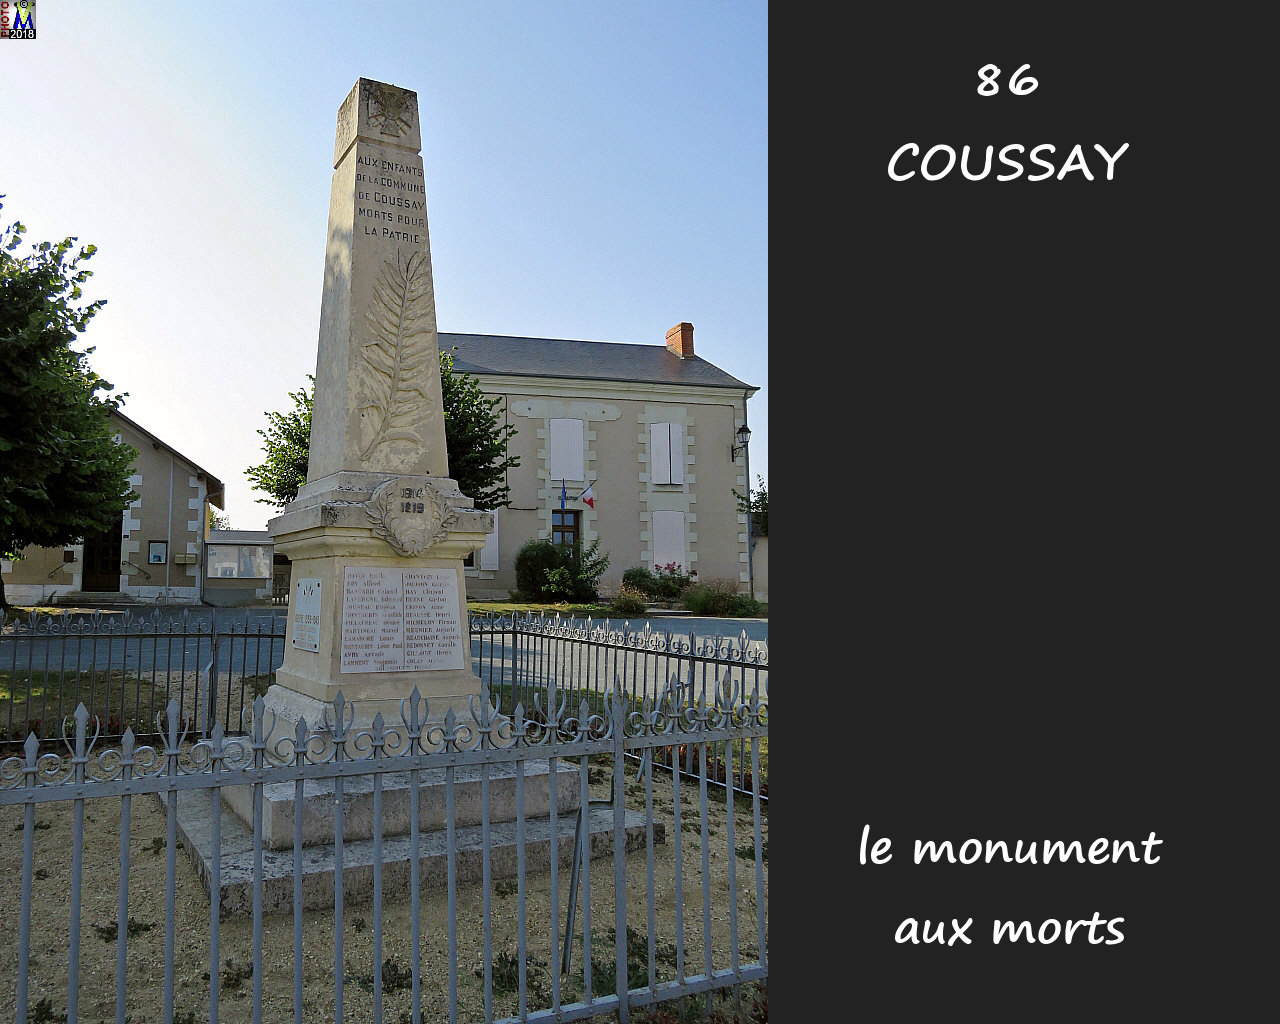 86COUSSAY_morts_100.jpg